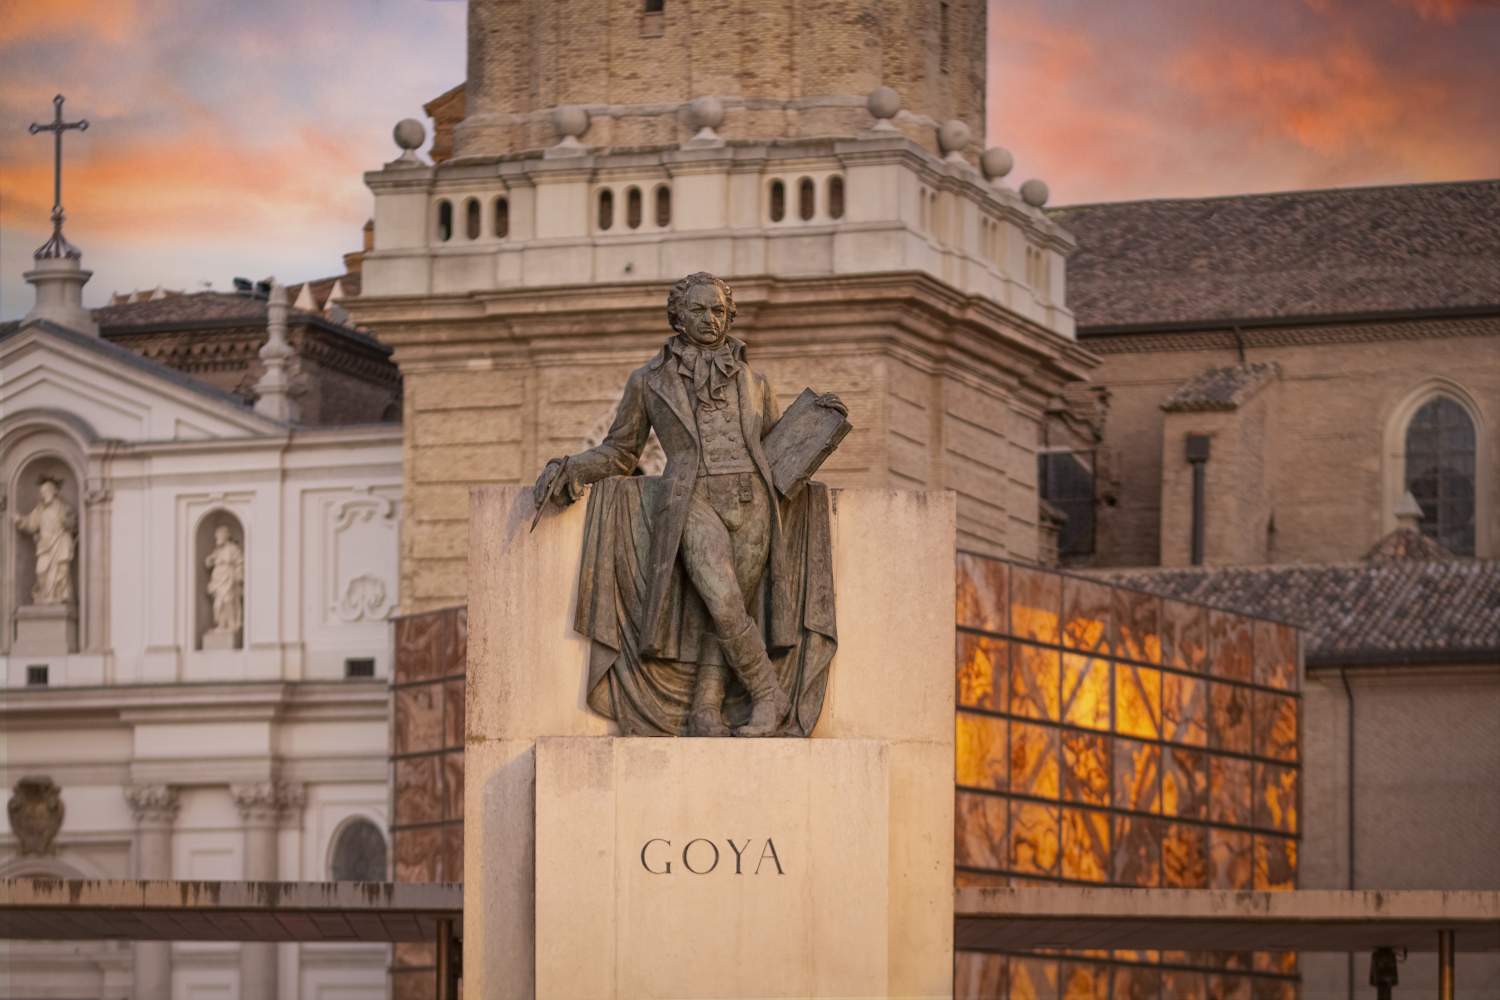 In Aragon in the footsteps of Goya, from Fuendetodos to Zaragoza. 